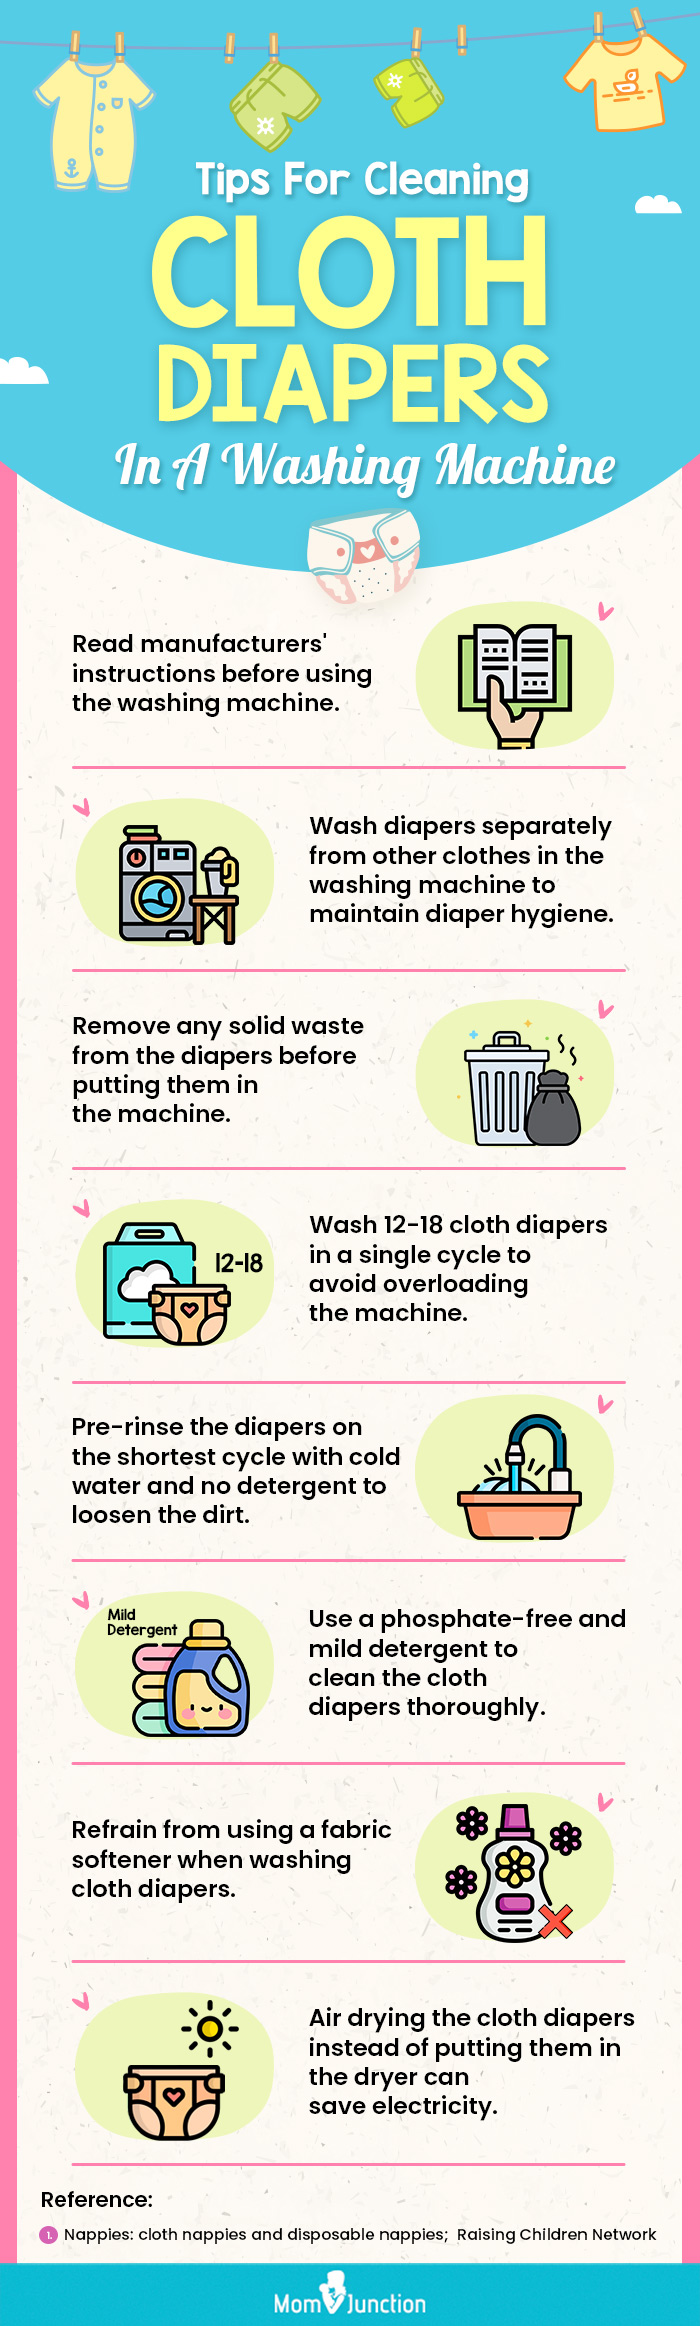 Tips-For-Cleaning-Cloth-Diapers-In-A-Washing-Machine(infographic)